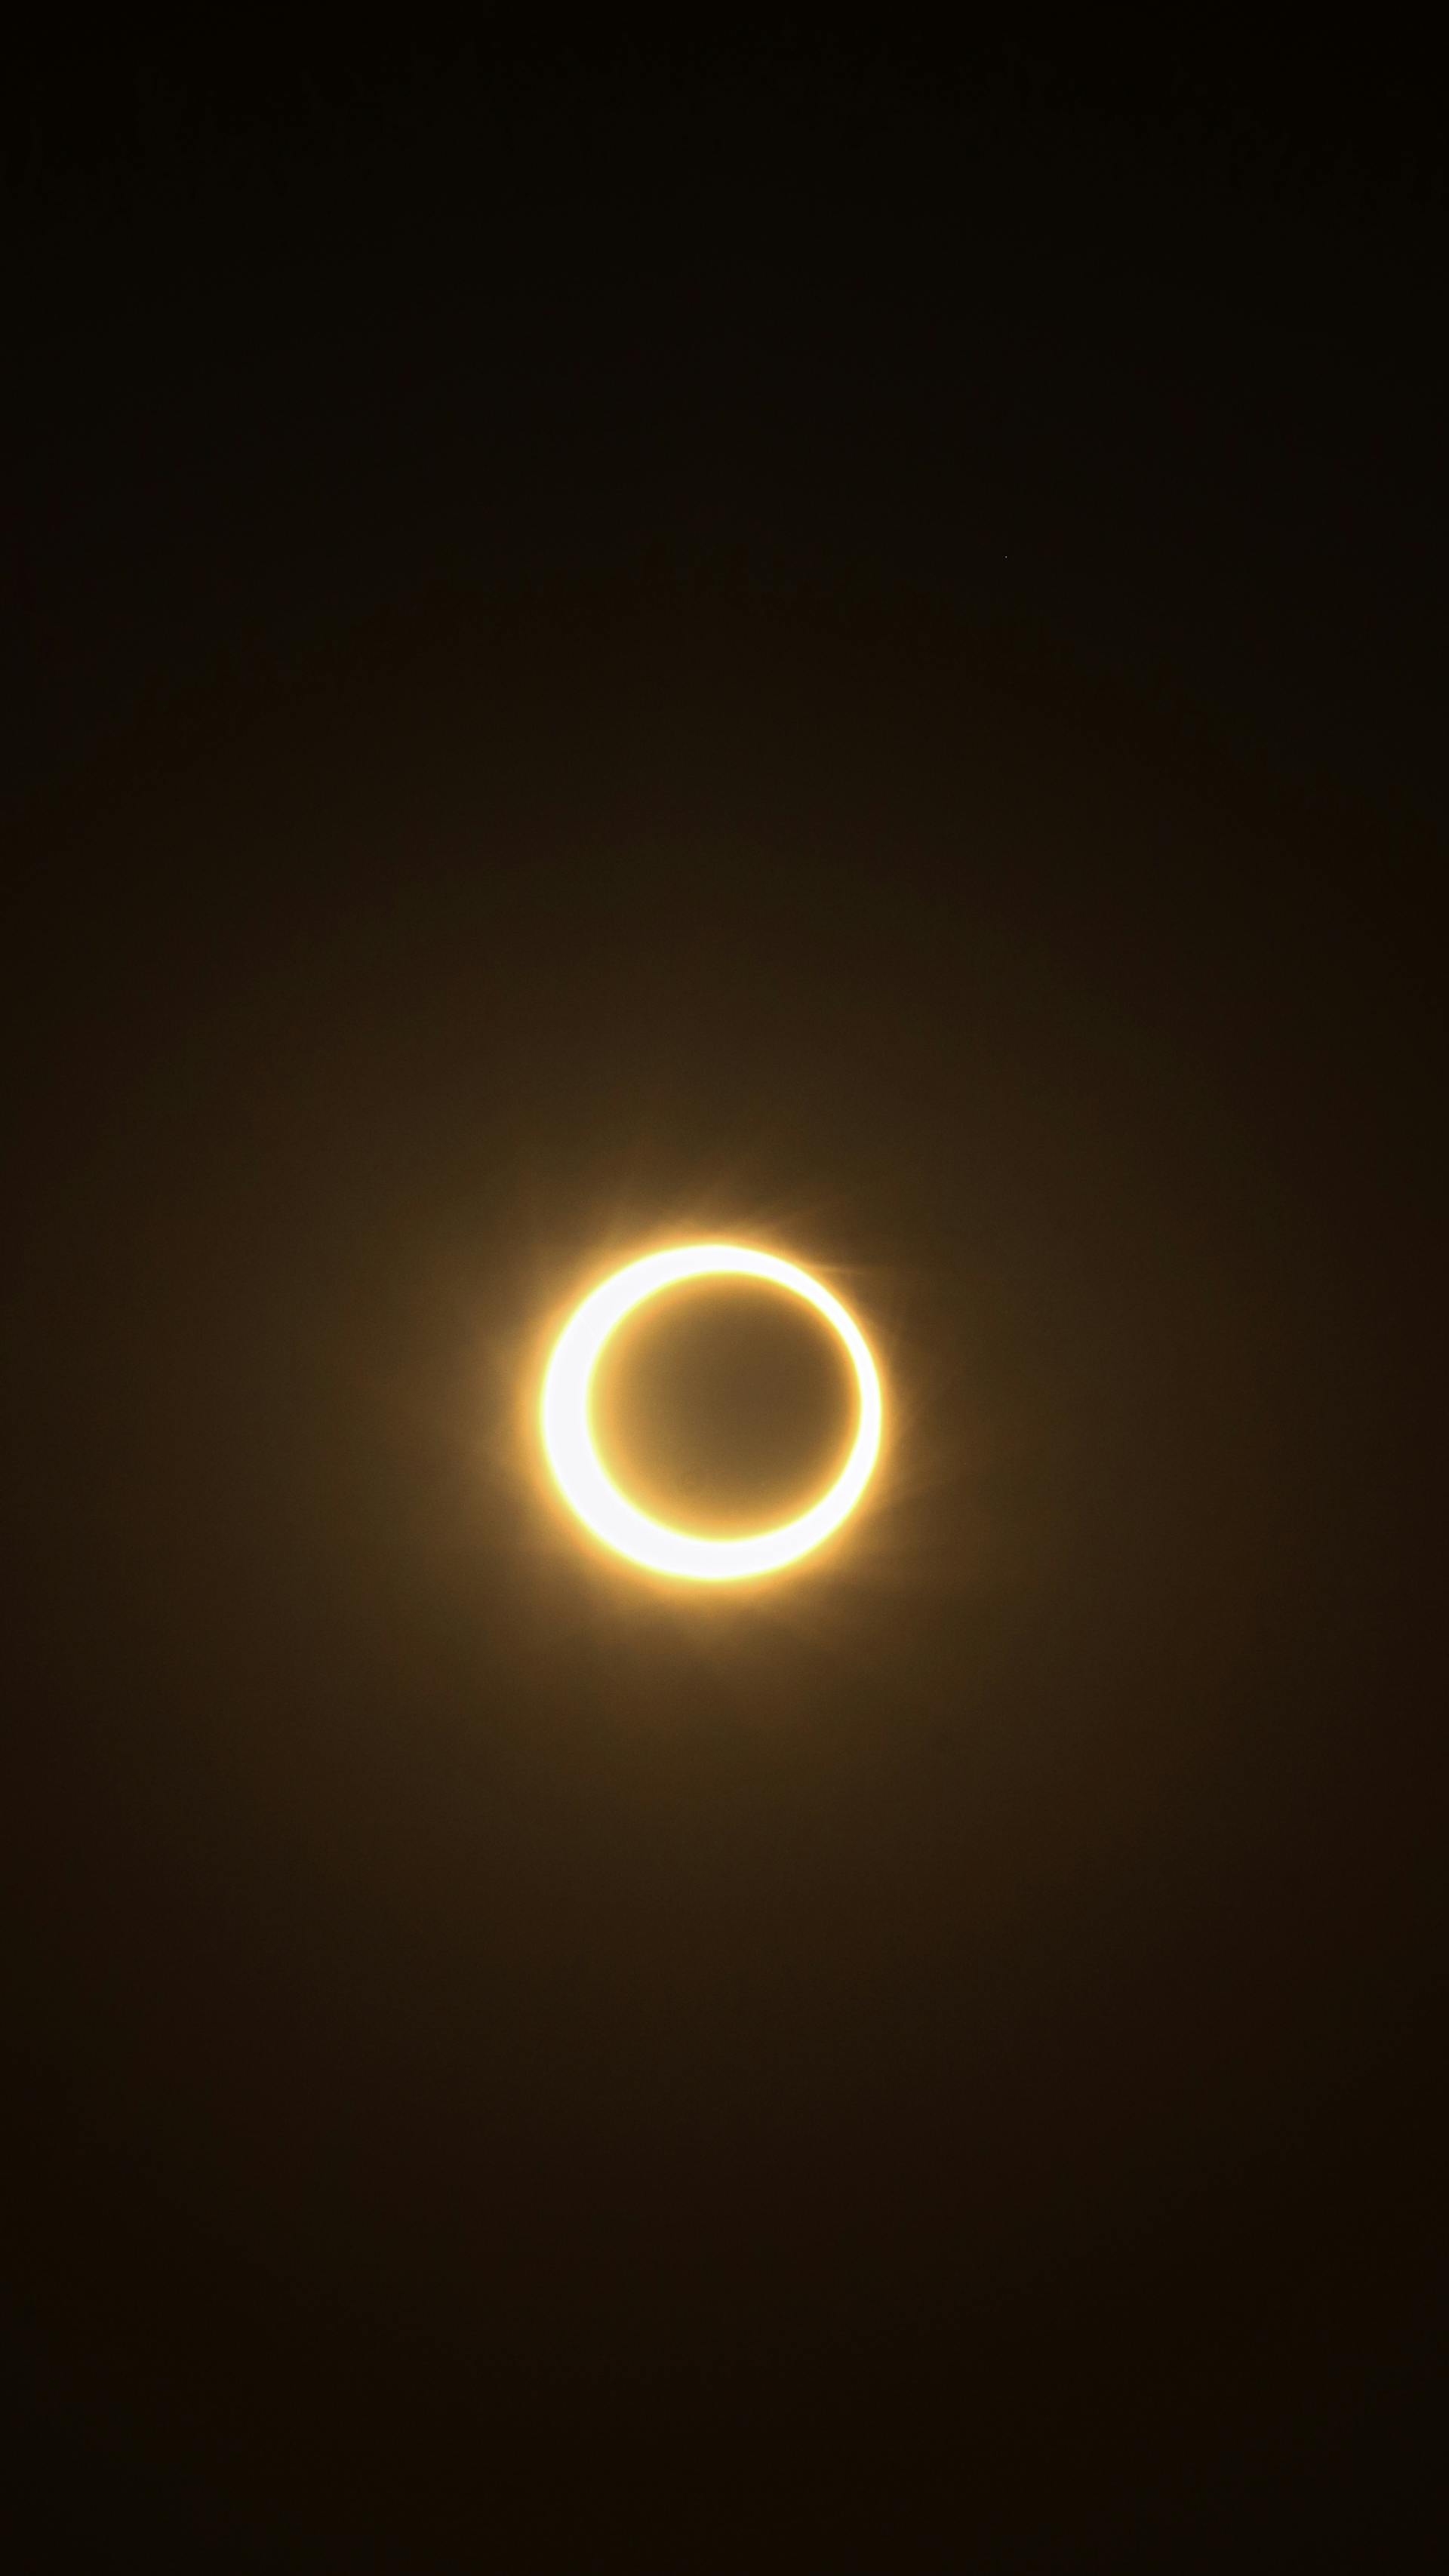 Image for Join Us April 8 for the Solar Eclipse in Bar Harbor: Deals, Tips and More!